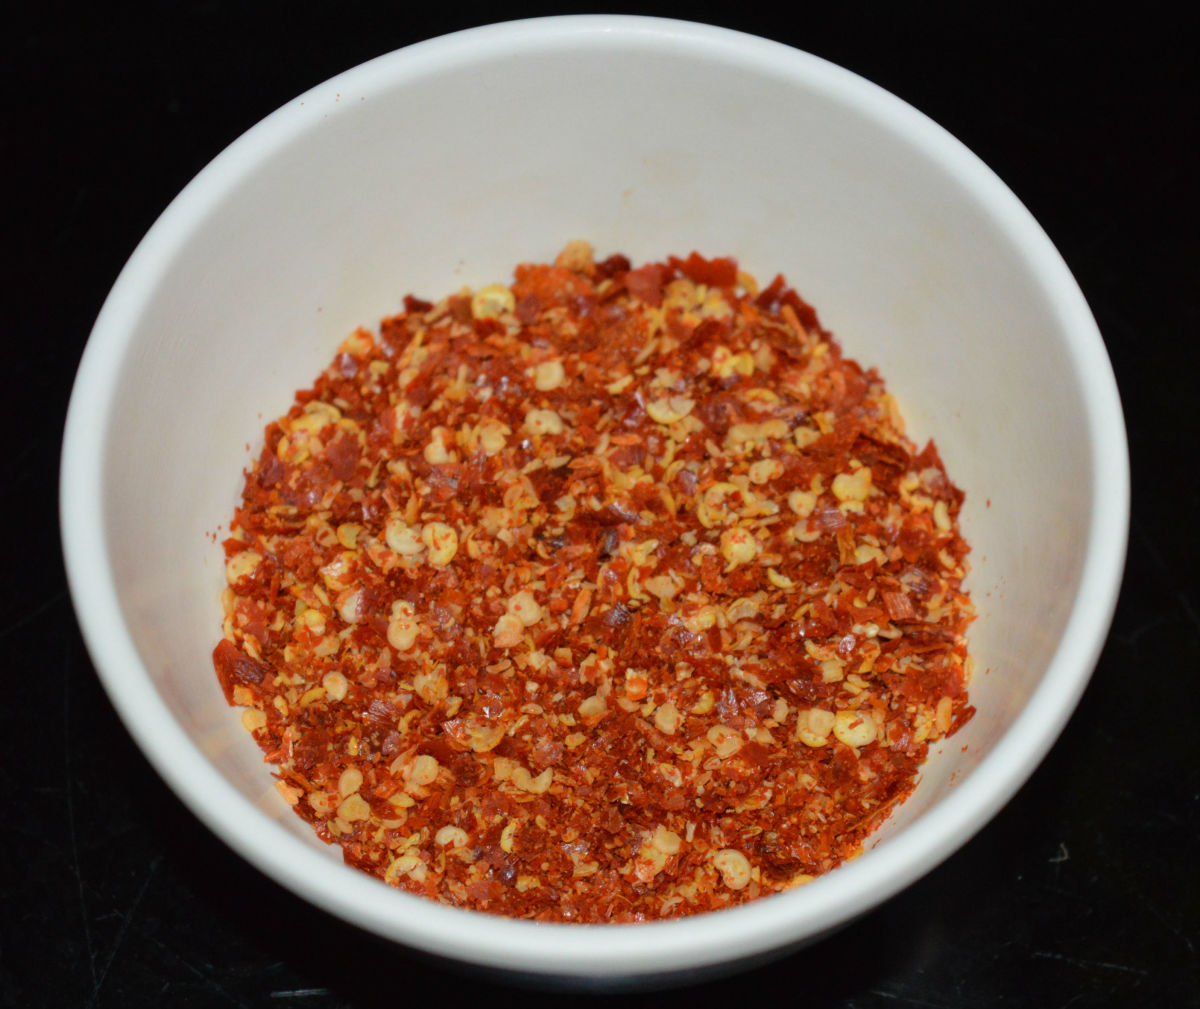 Now you have homemade chili flakes.